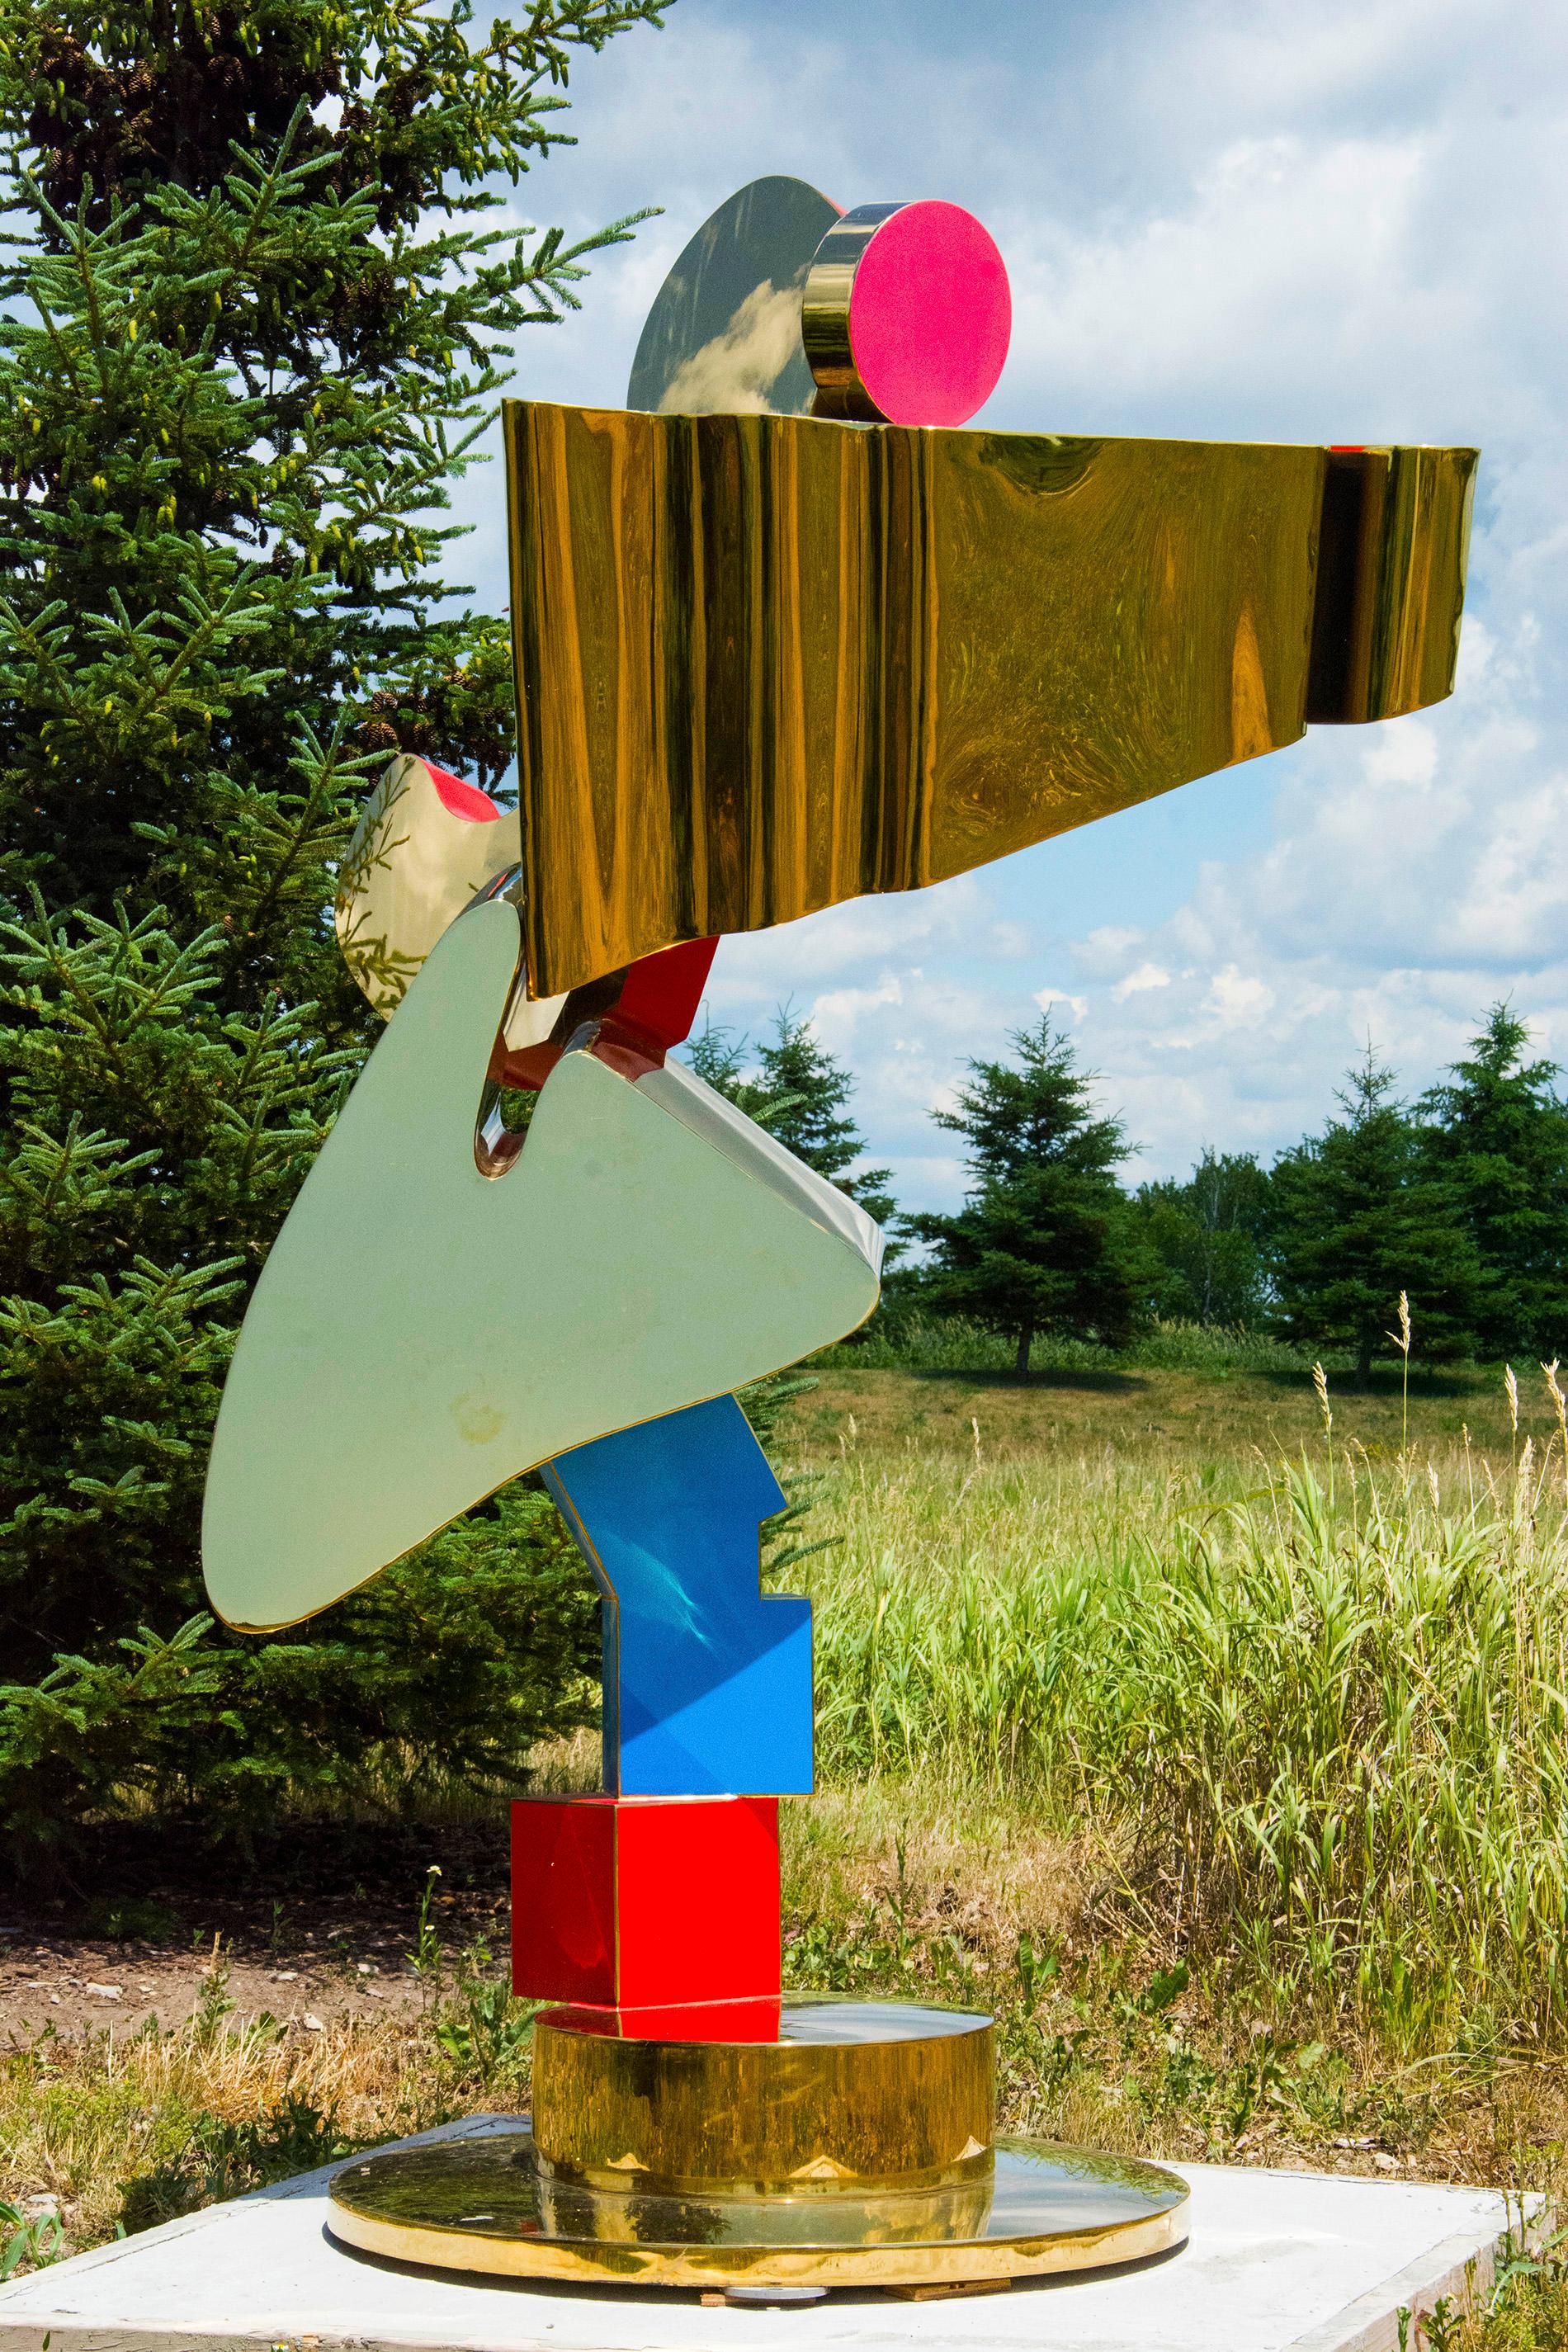 A column of colorful and precariously stacked shapes glitters in the sun. This playful outdoor sculpture by Viktor Mitic may also be installed indoors.

Serbian-born Viktor Mitic earned a BFA from the University of Toronto in 1995 with studies in